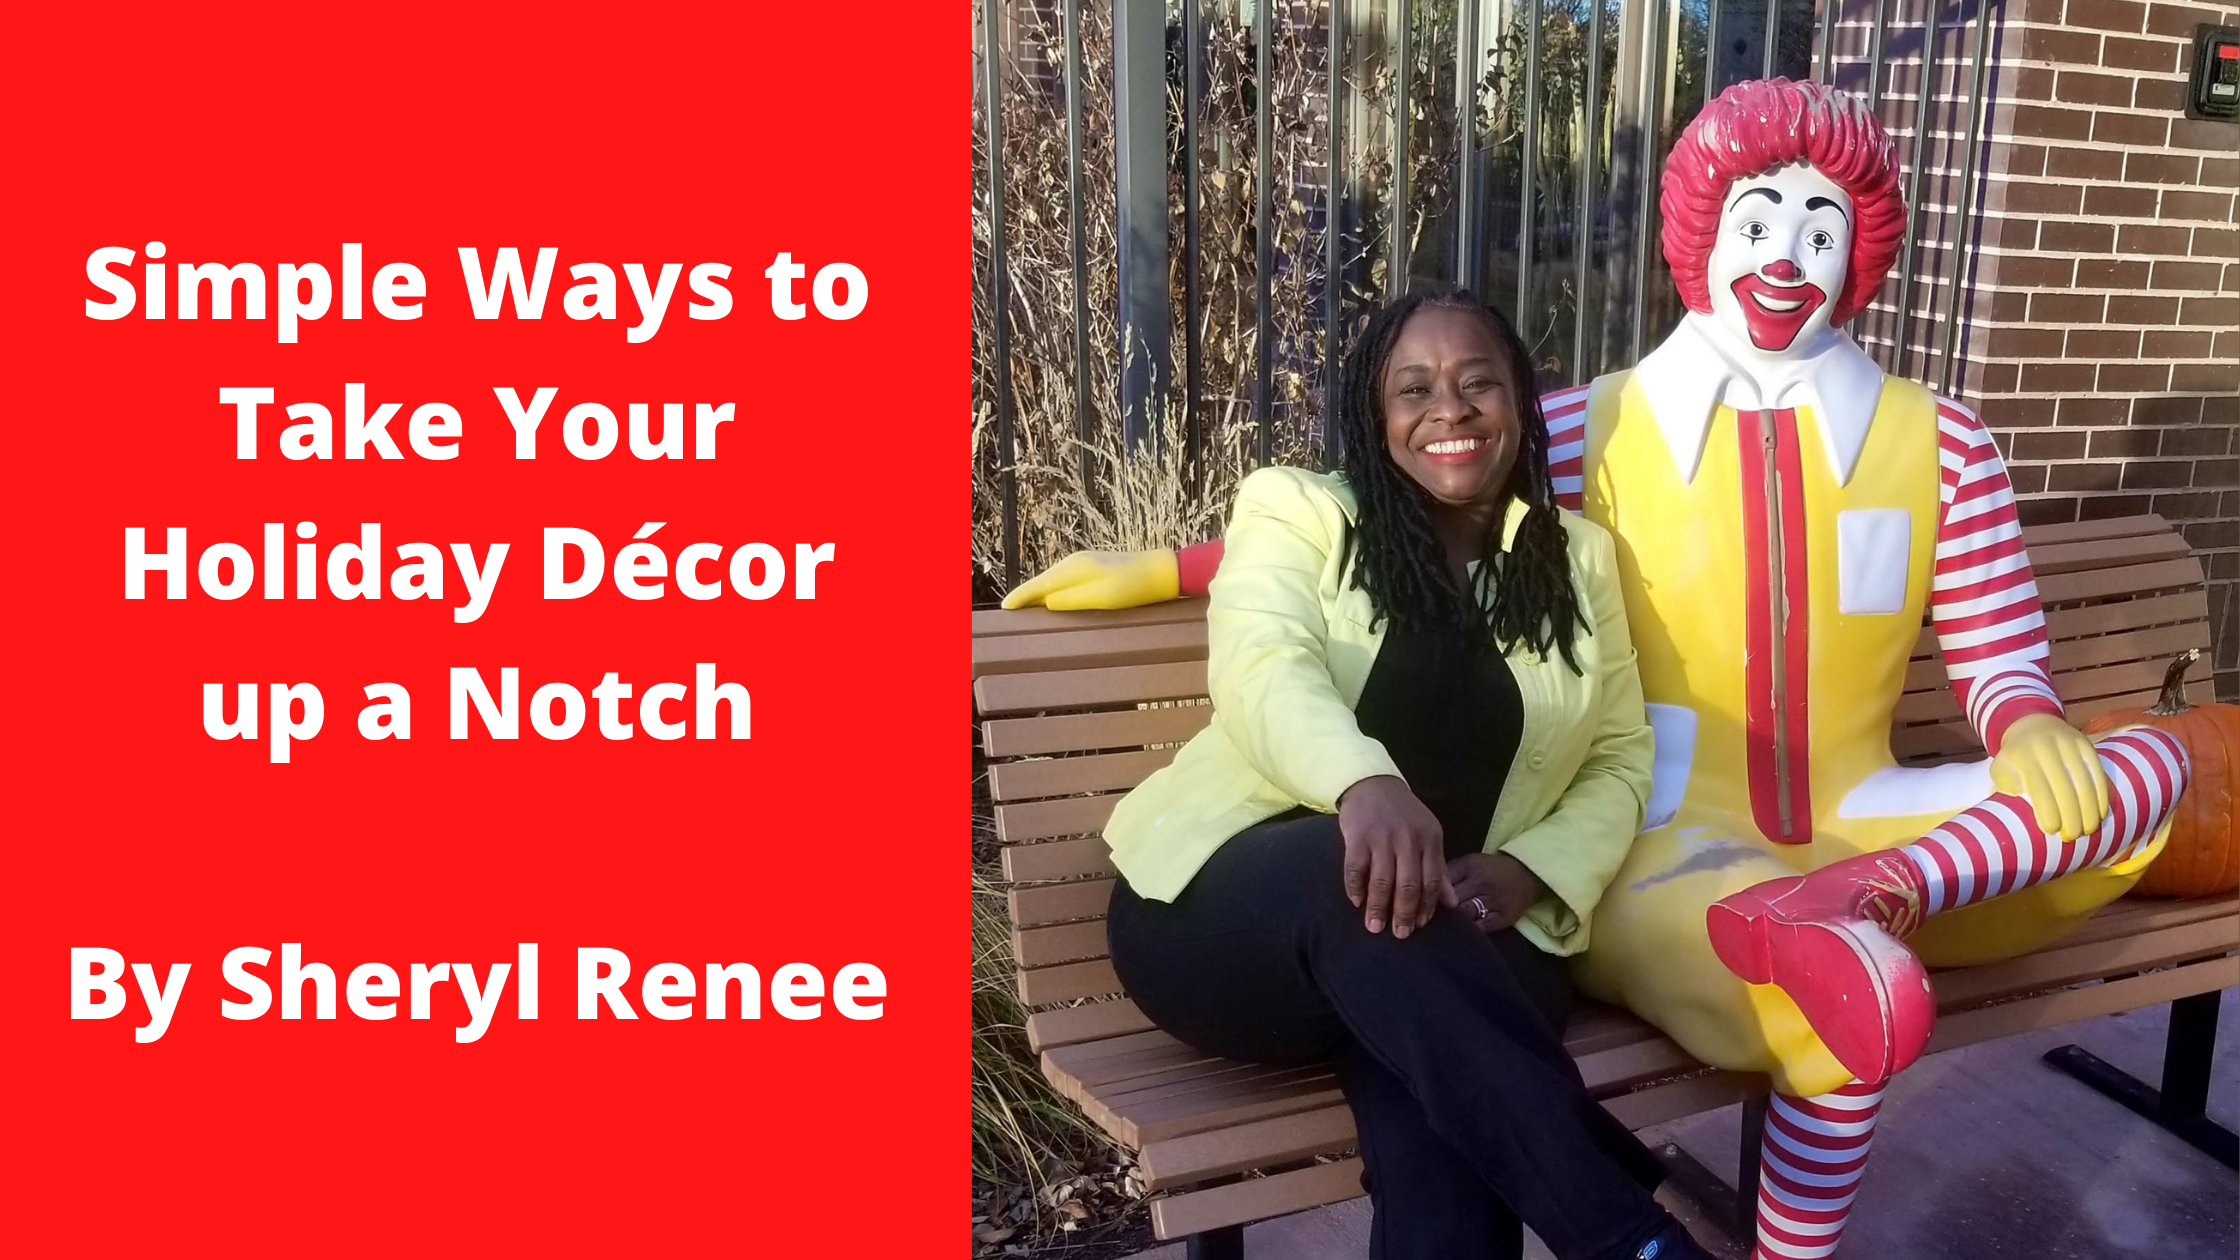 Simple Ways to Take Your Holiday Décor up a Notch By Sheryl Renee